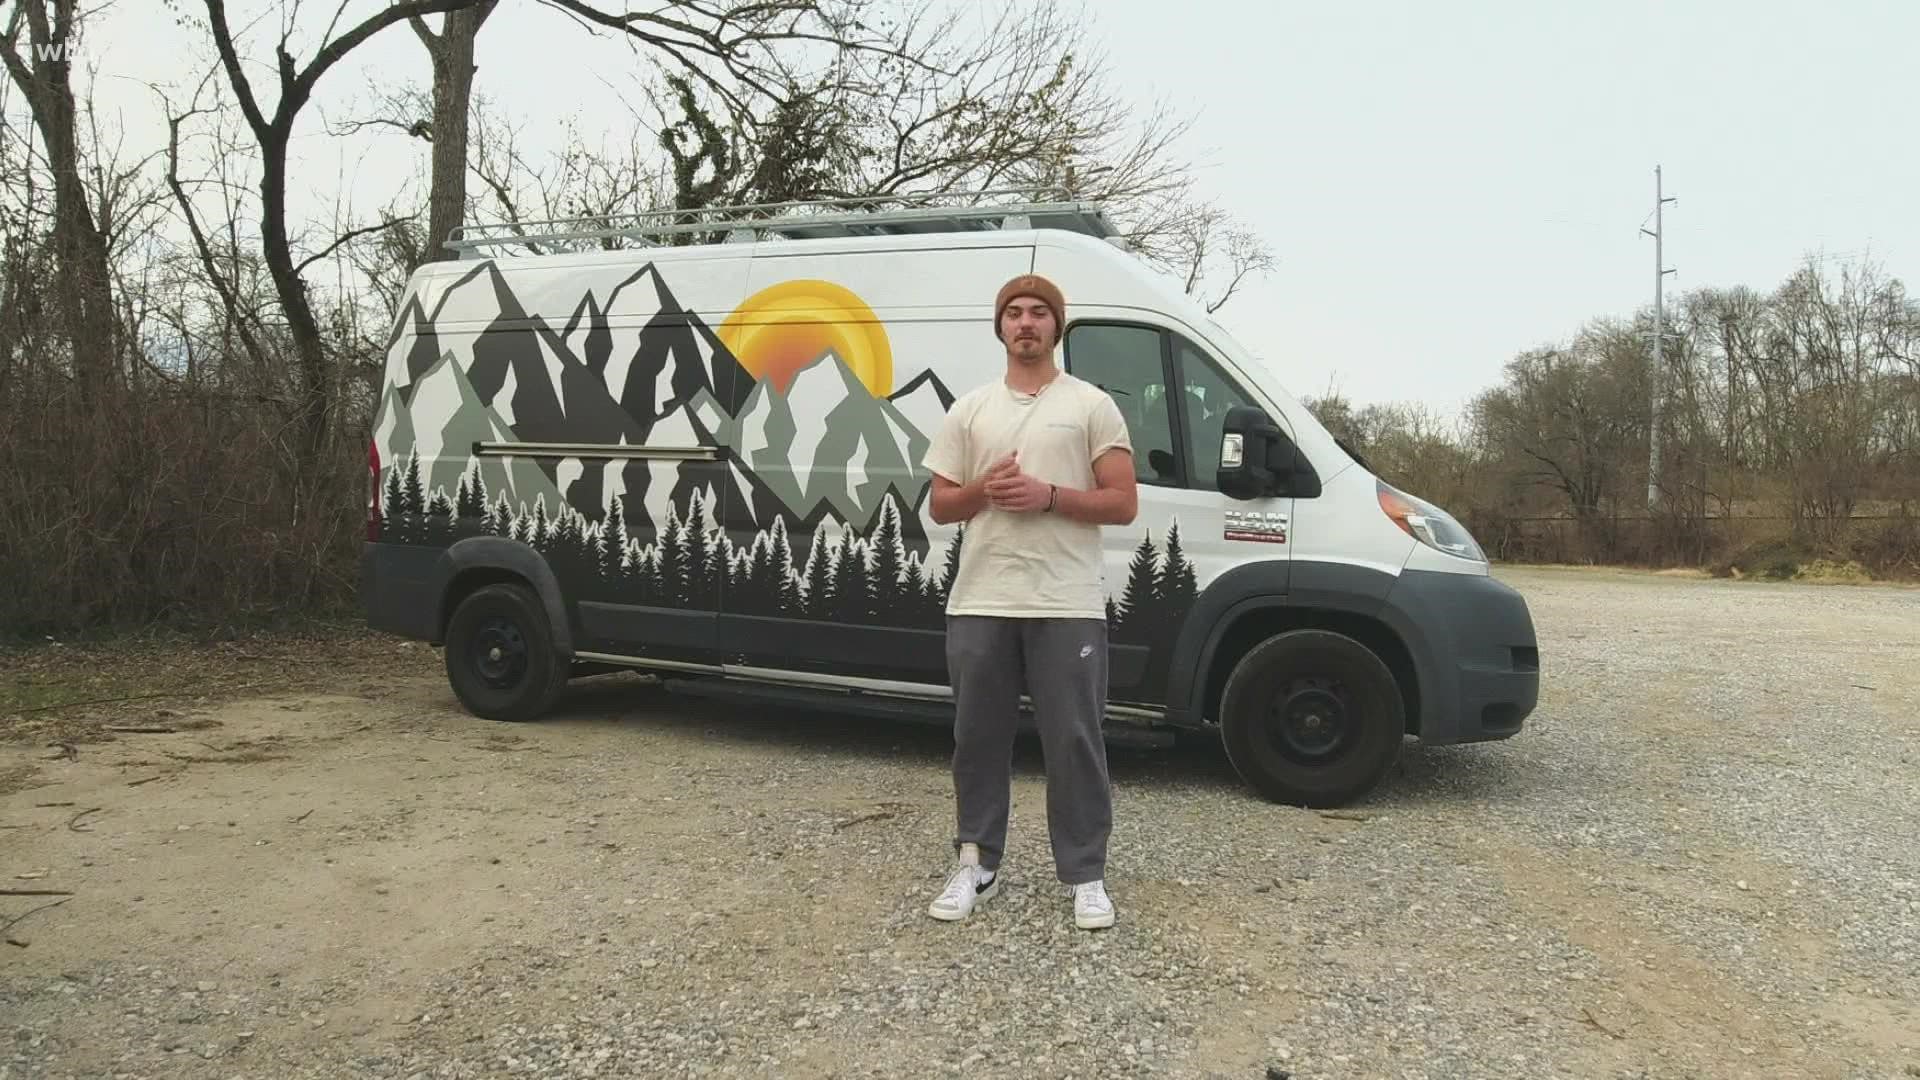 Have you ever wanted to sell everything and just travel in the van you live in? One UT student is doing just that.